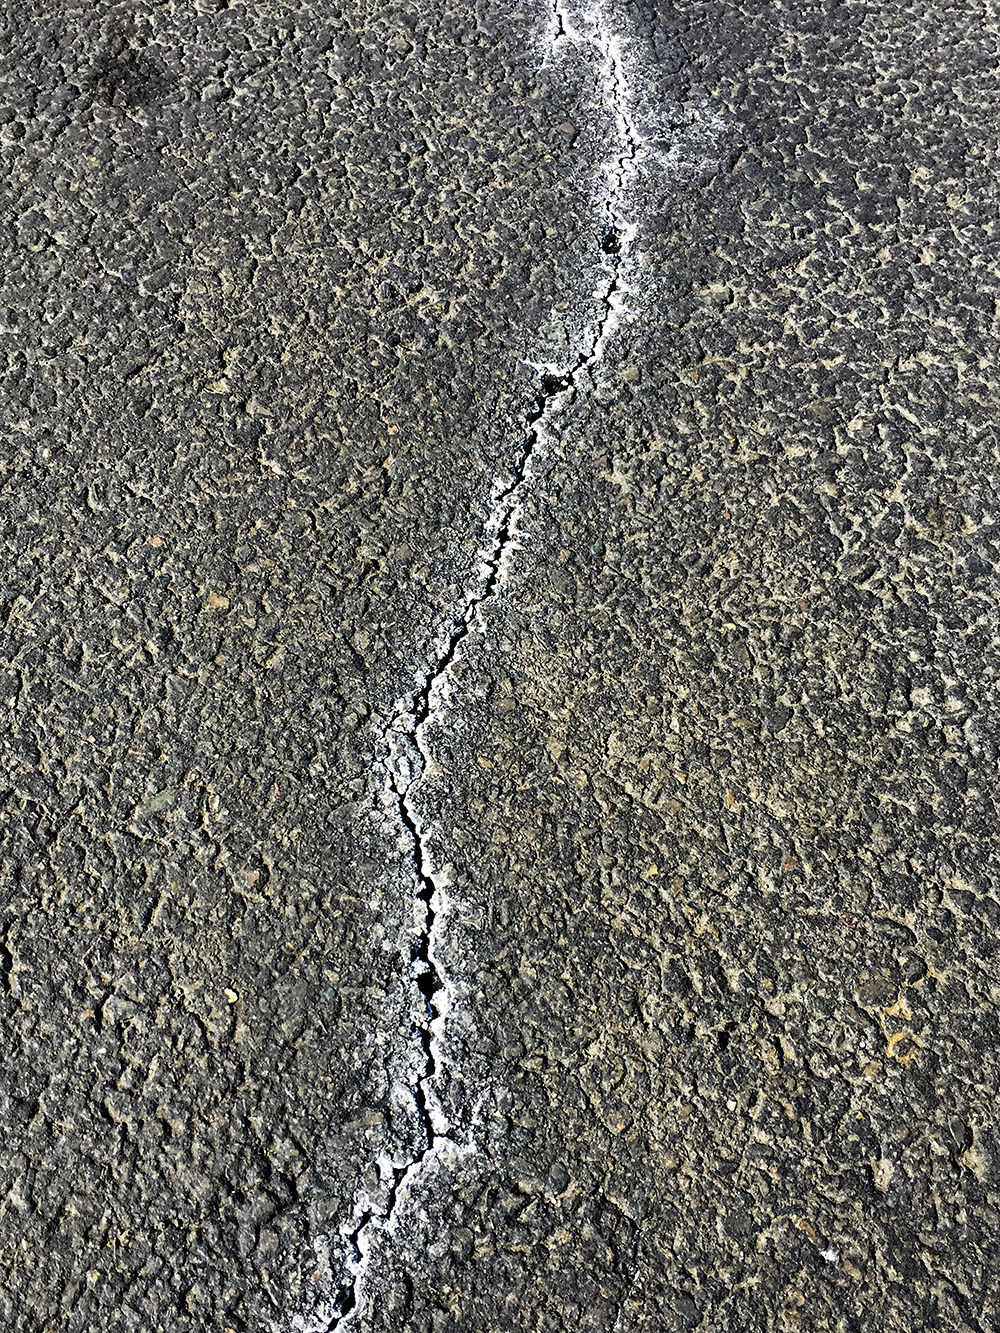 White spots that appear in pavement and what they are - by Craig Swain